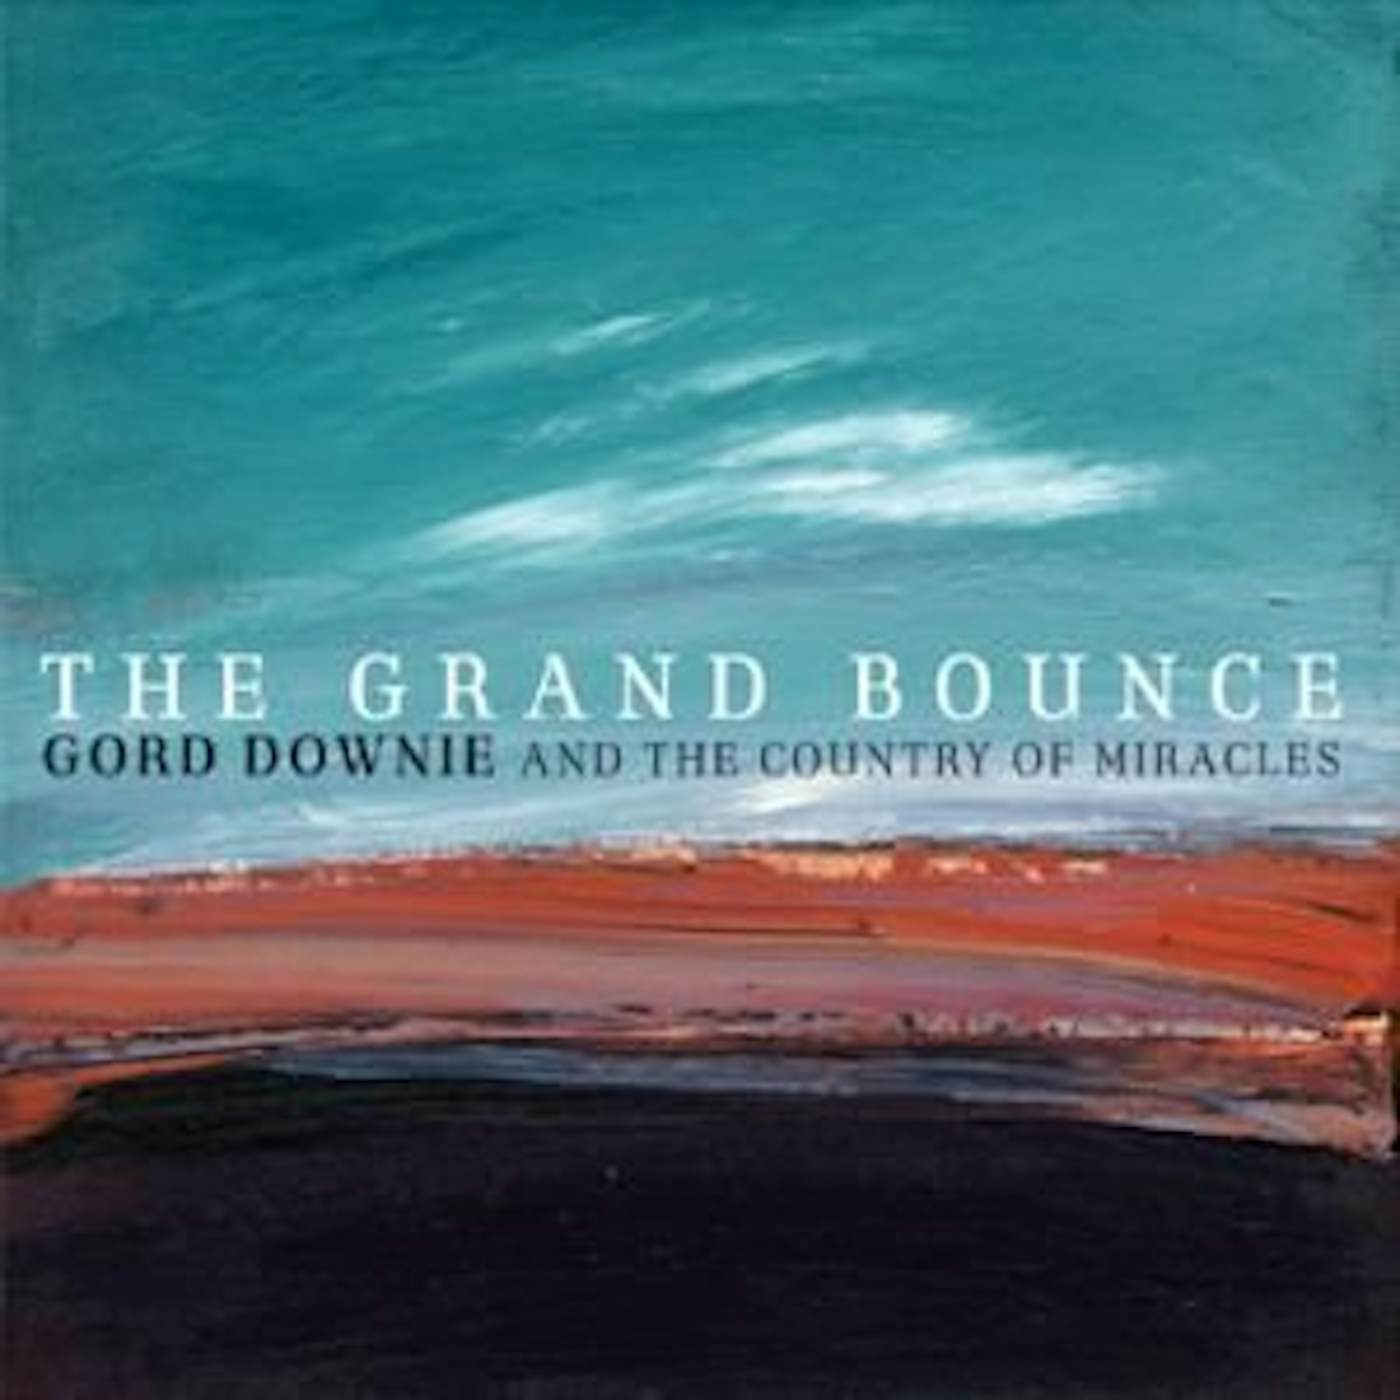 Gord Downie GRAND BOUNCE Vinyl Record - Canada Release